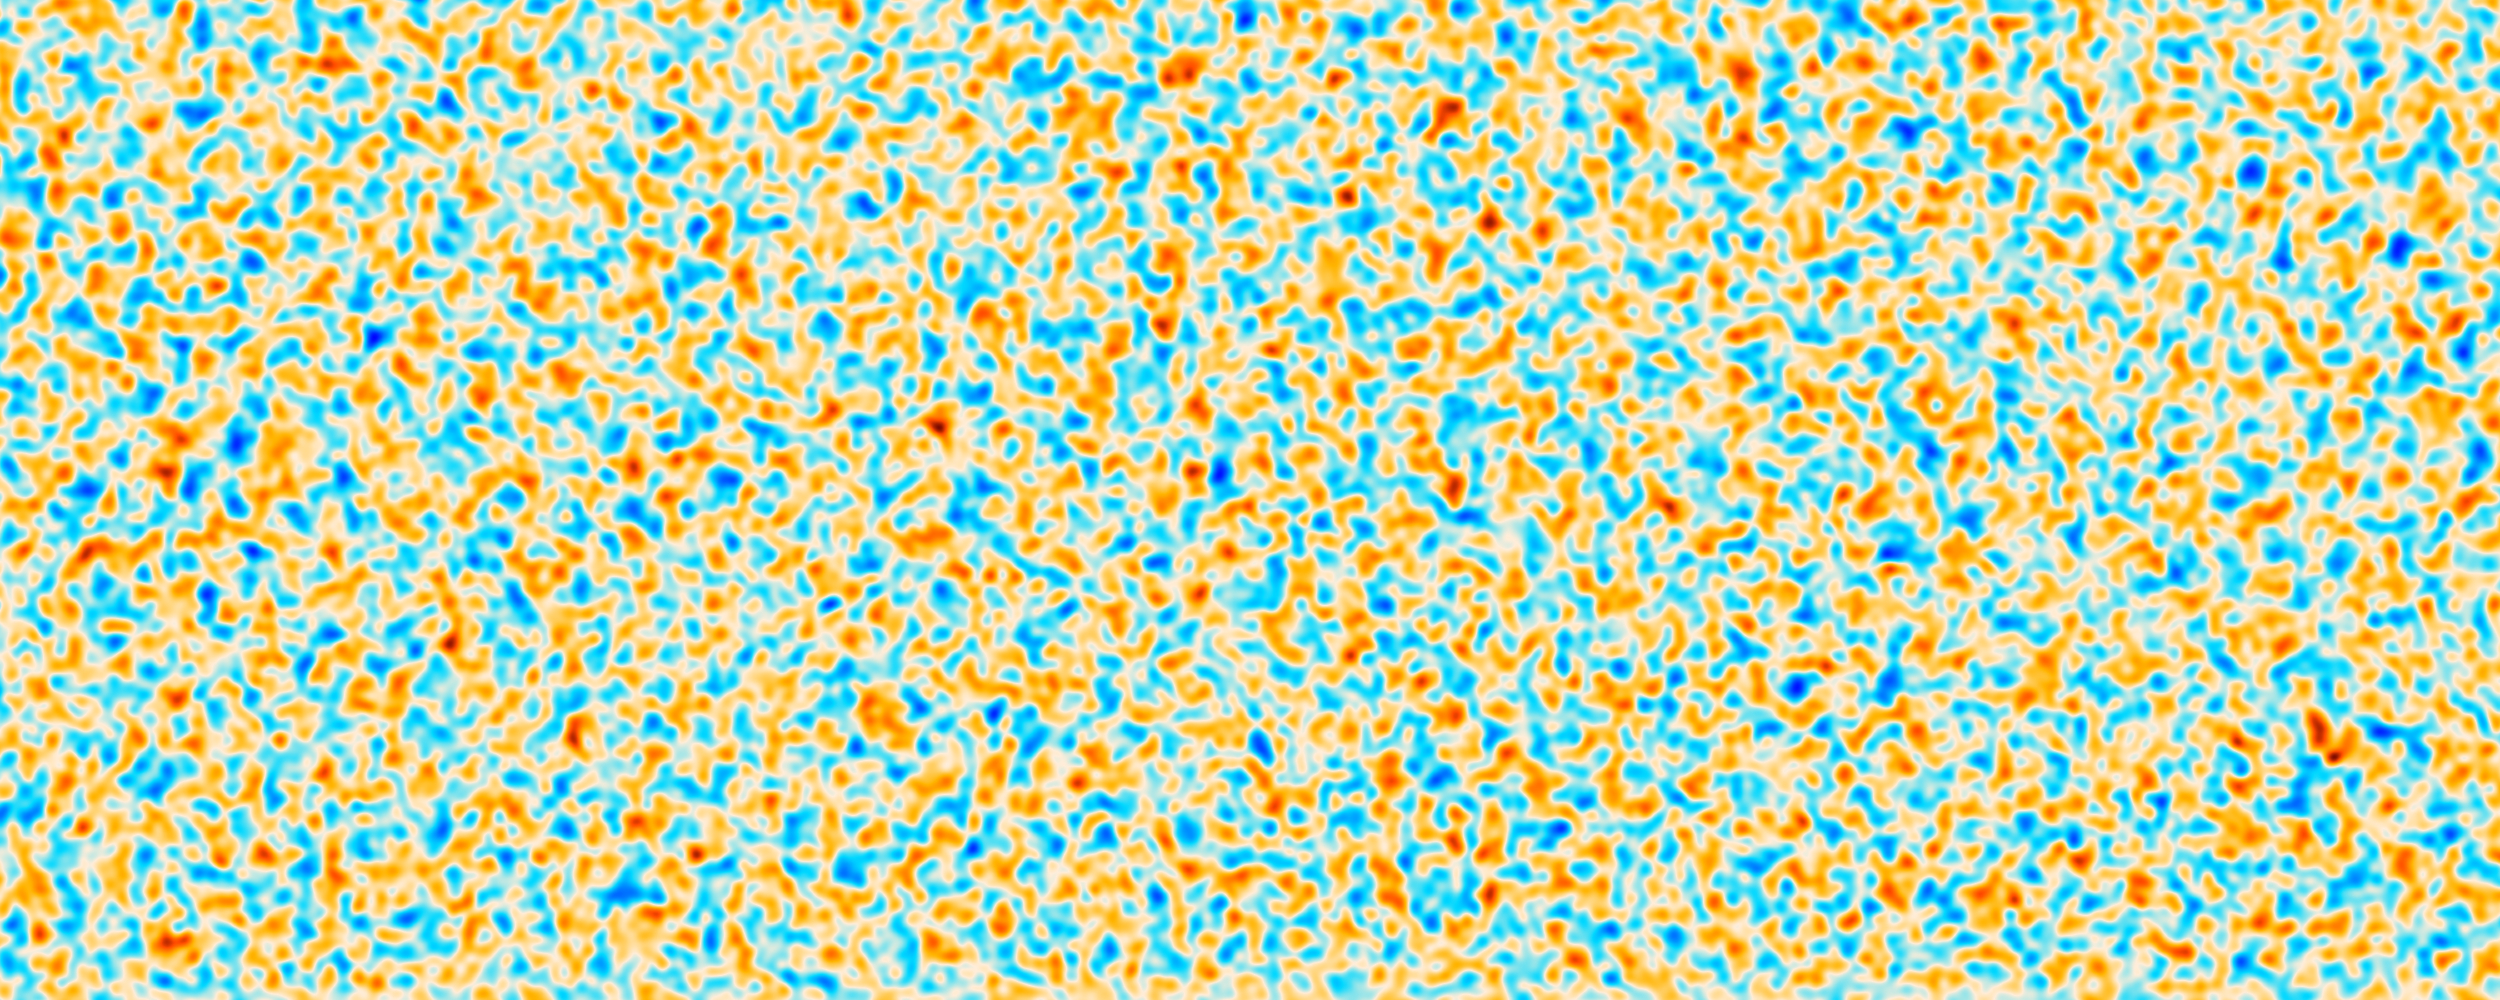 an image of the cosmic microwave background, showing variations in polarization as shades of orange and blue